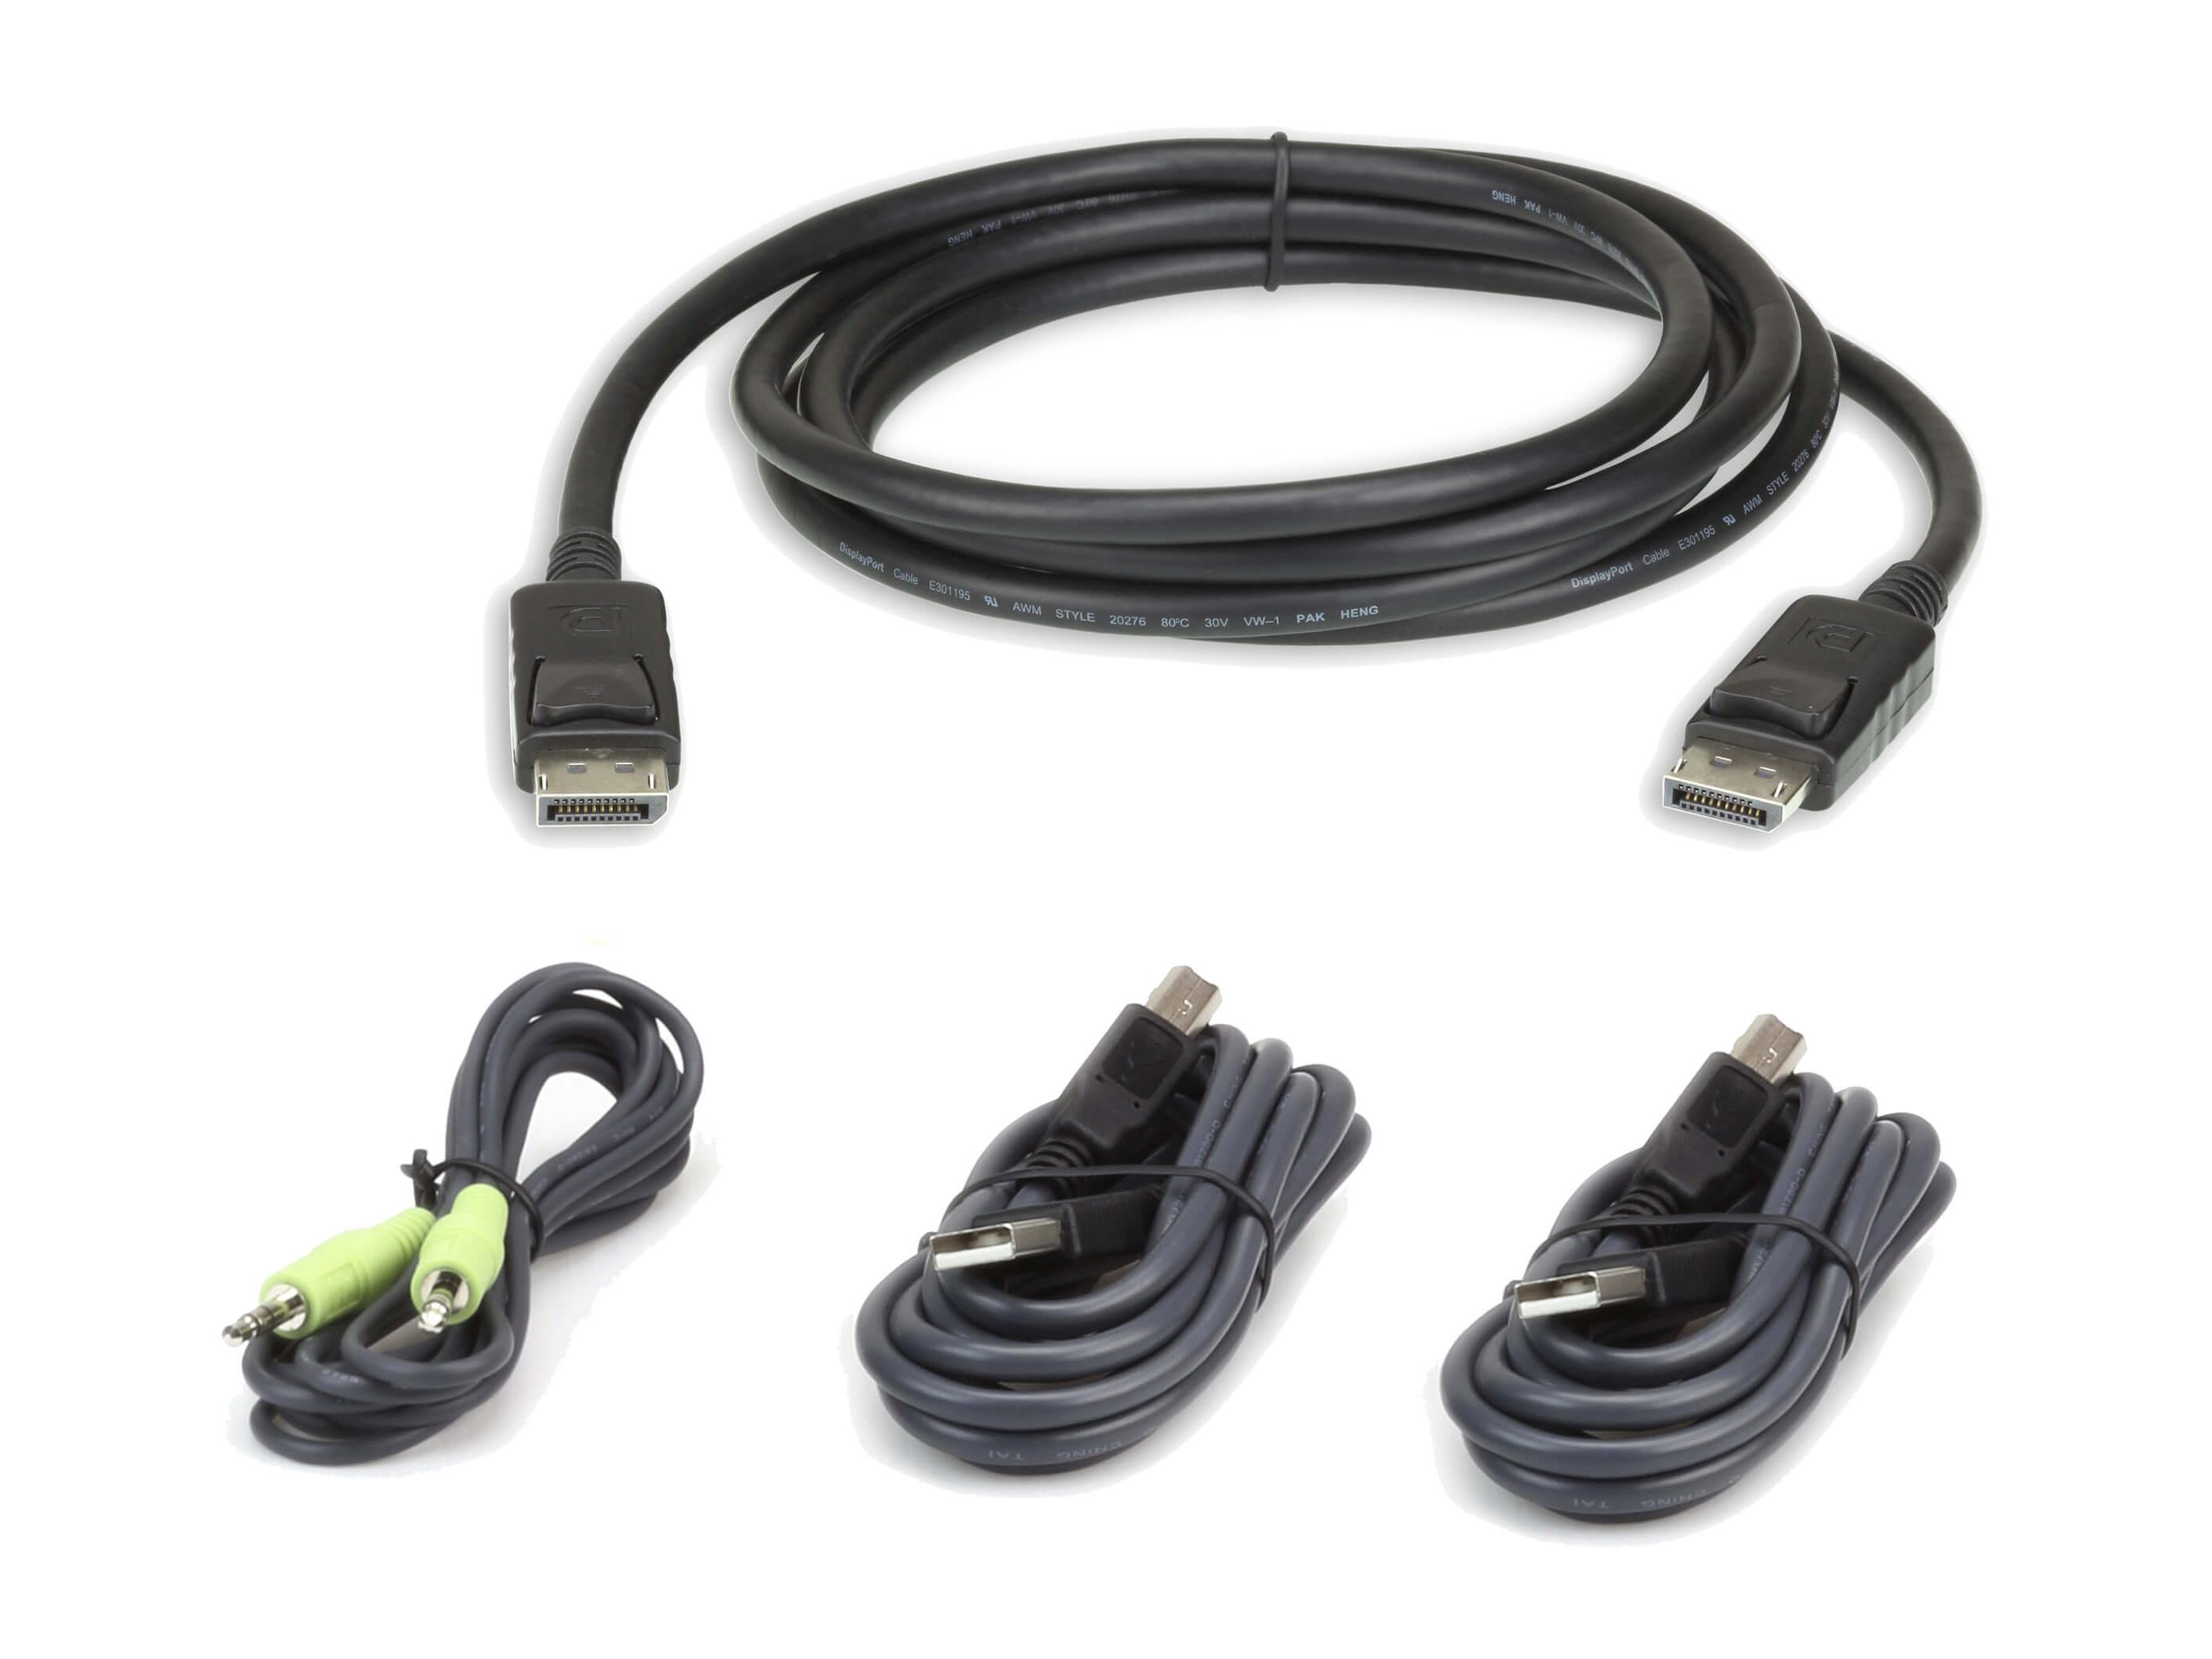 2L7D03UDPX4 10ft Single Display DisplayPort Secure KVM Cable Kit by Aten